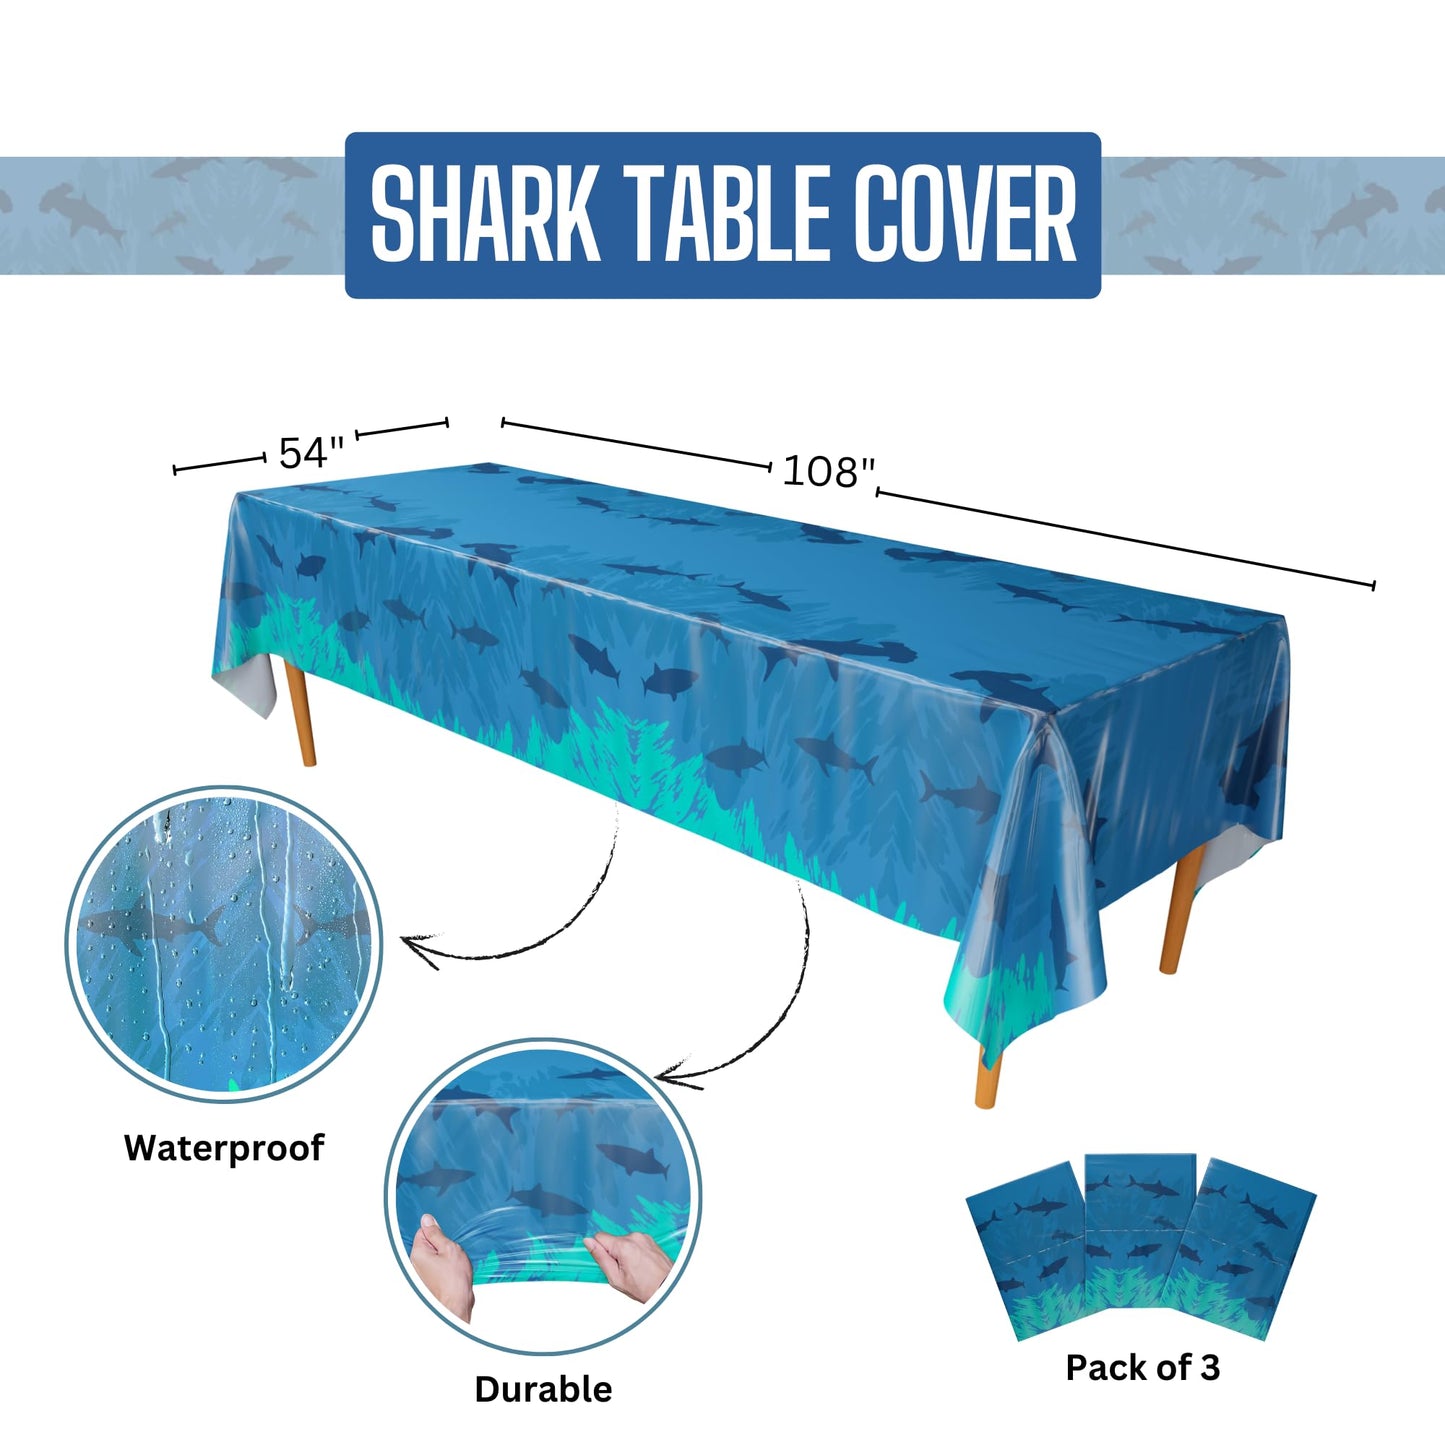 Shark Table Covers - 54in x 108in (3 Pack)